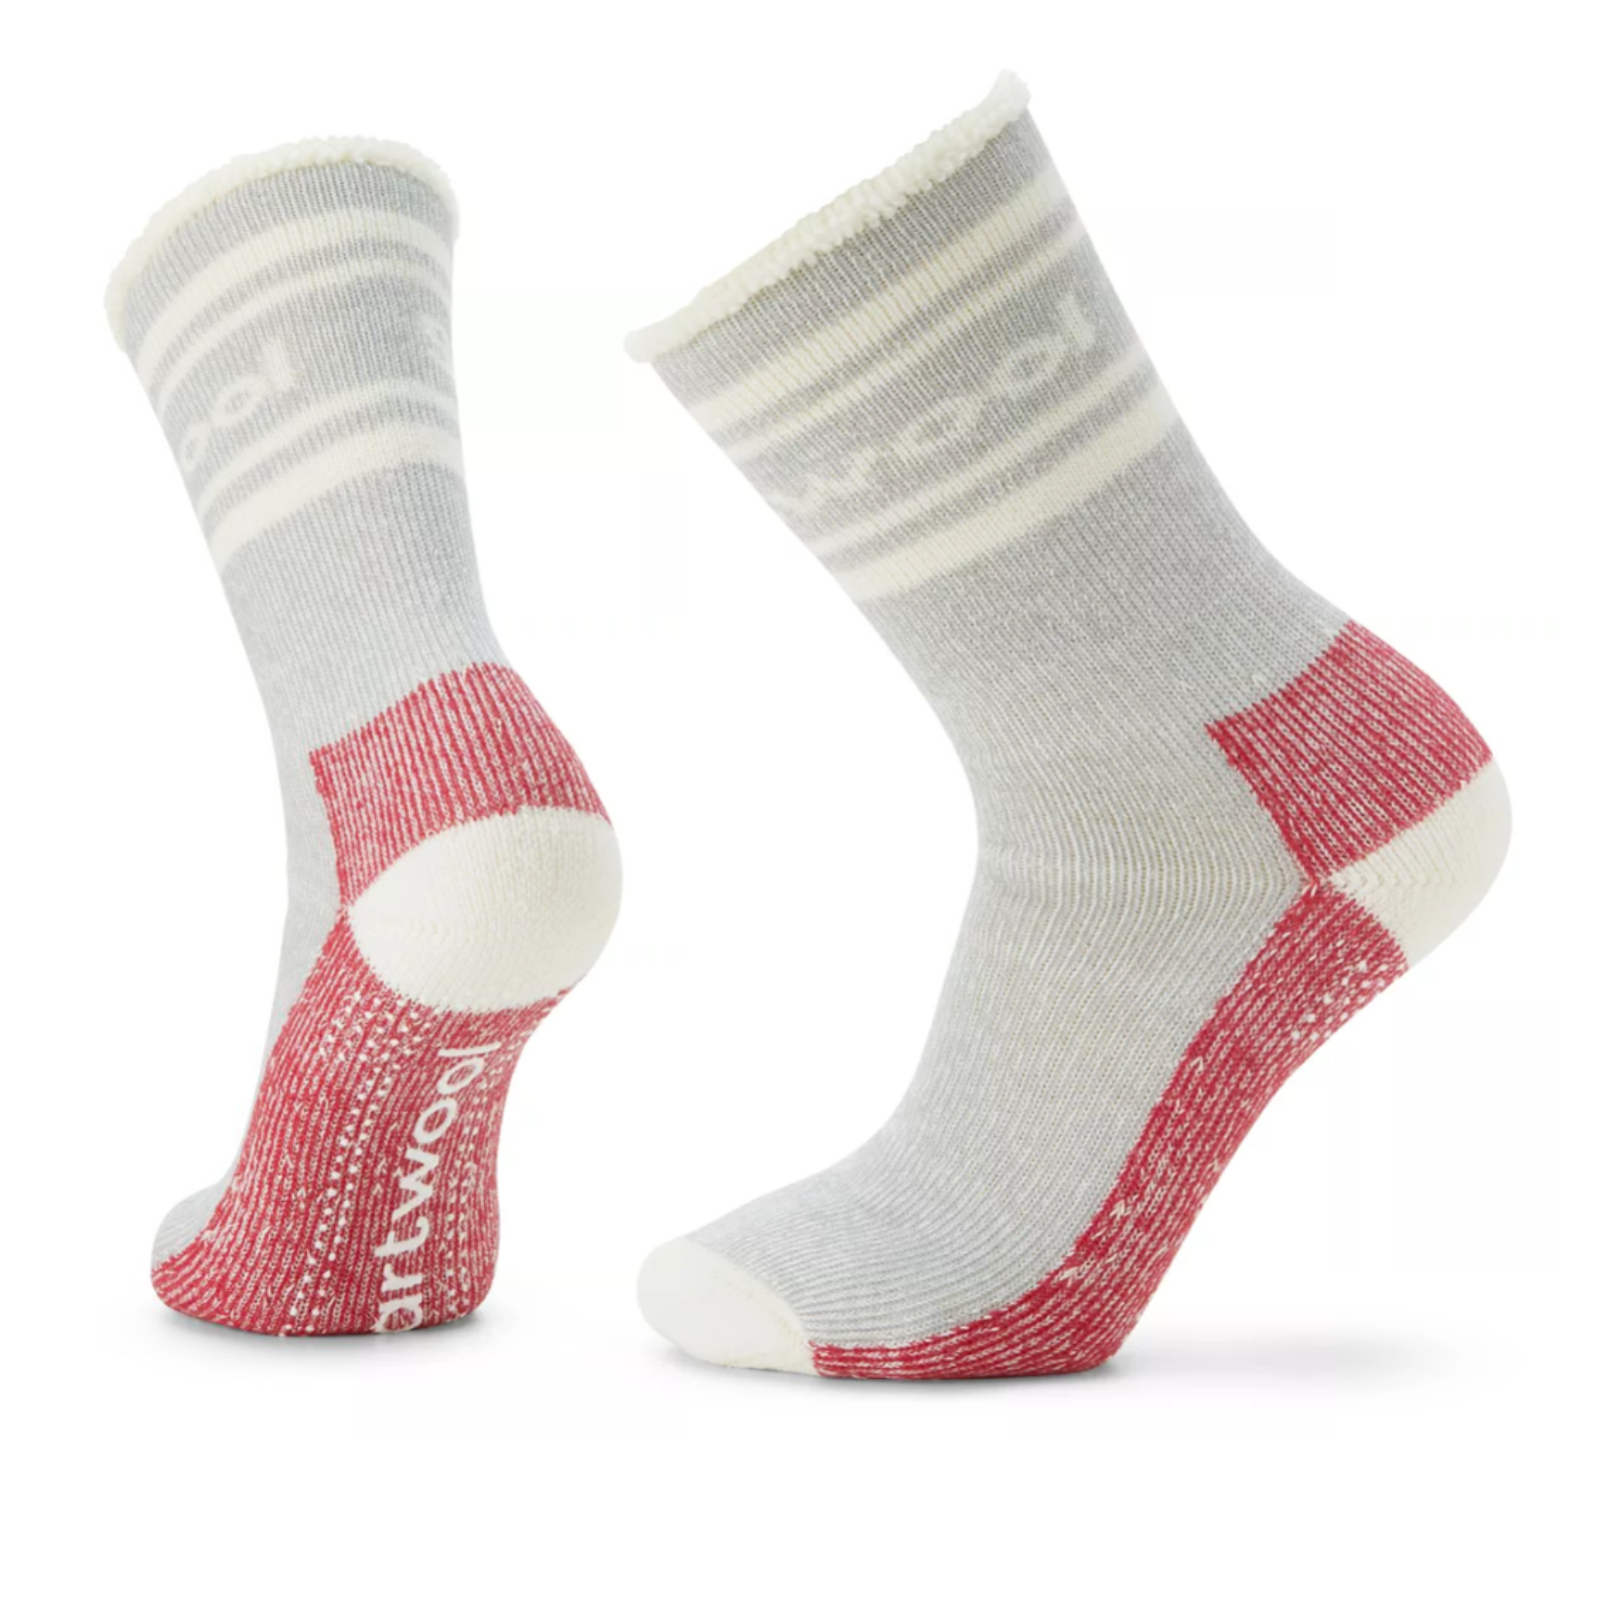 Medium Gray Smartwool Everyday Slipper Crew women's and men's sock featuring gray sock with white cuff, toe, and heel and red sole. "Smartwool" written across top of sock below cuff. Socks shown on display feet. 